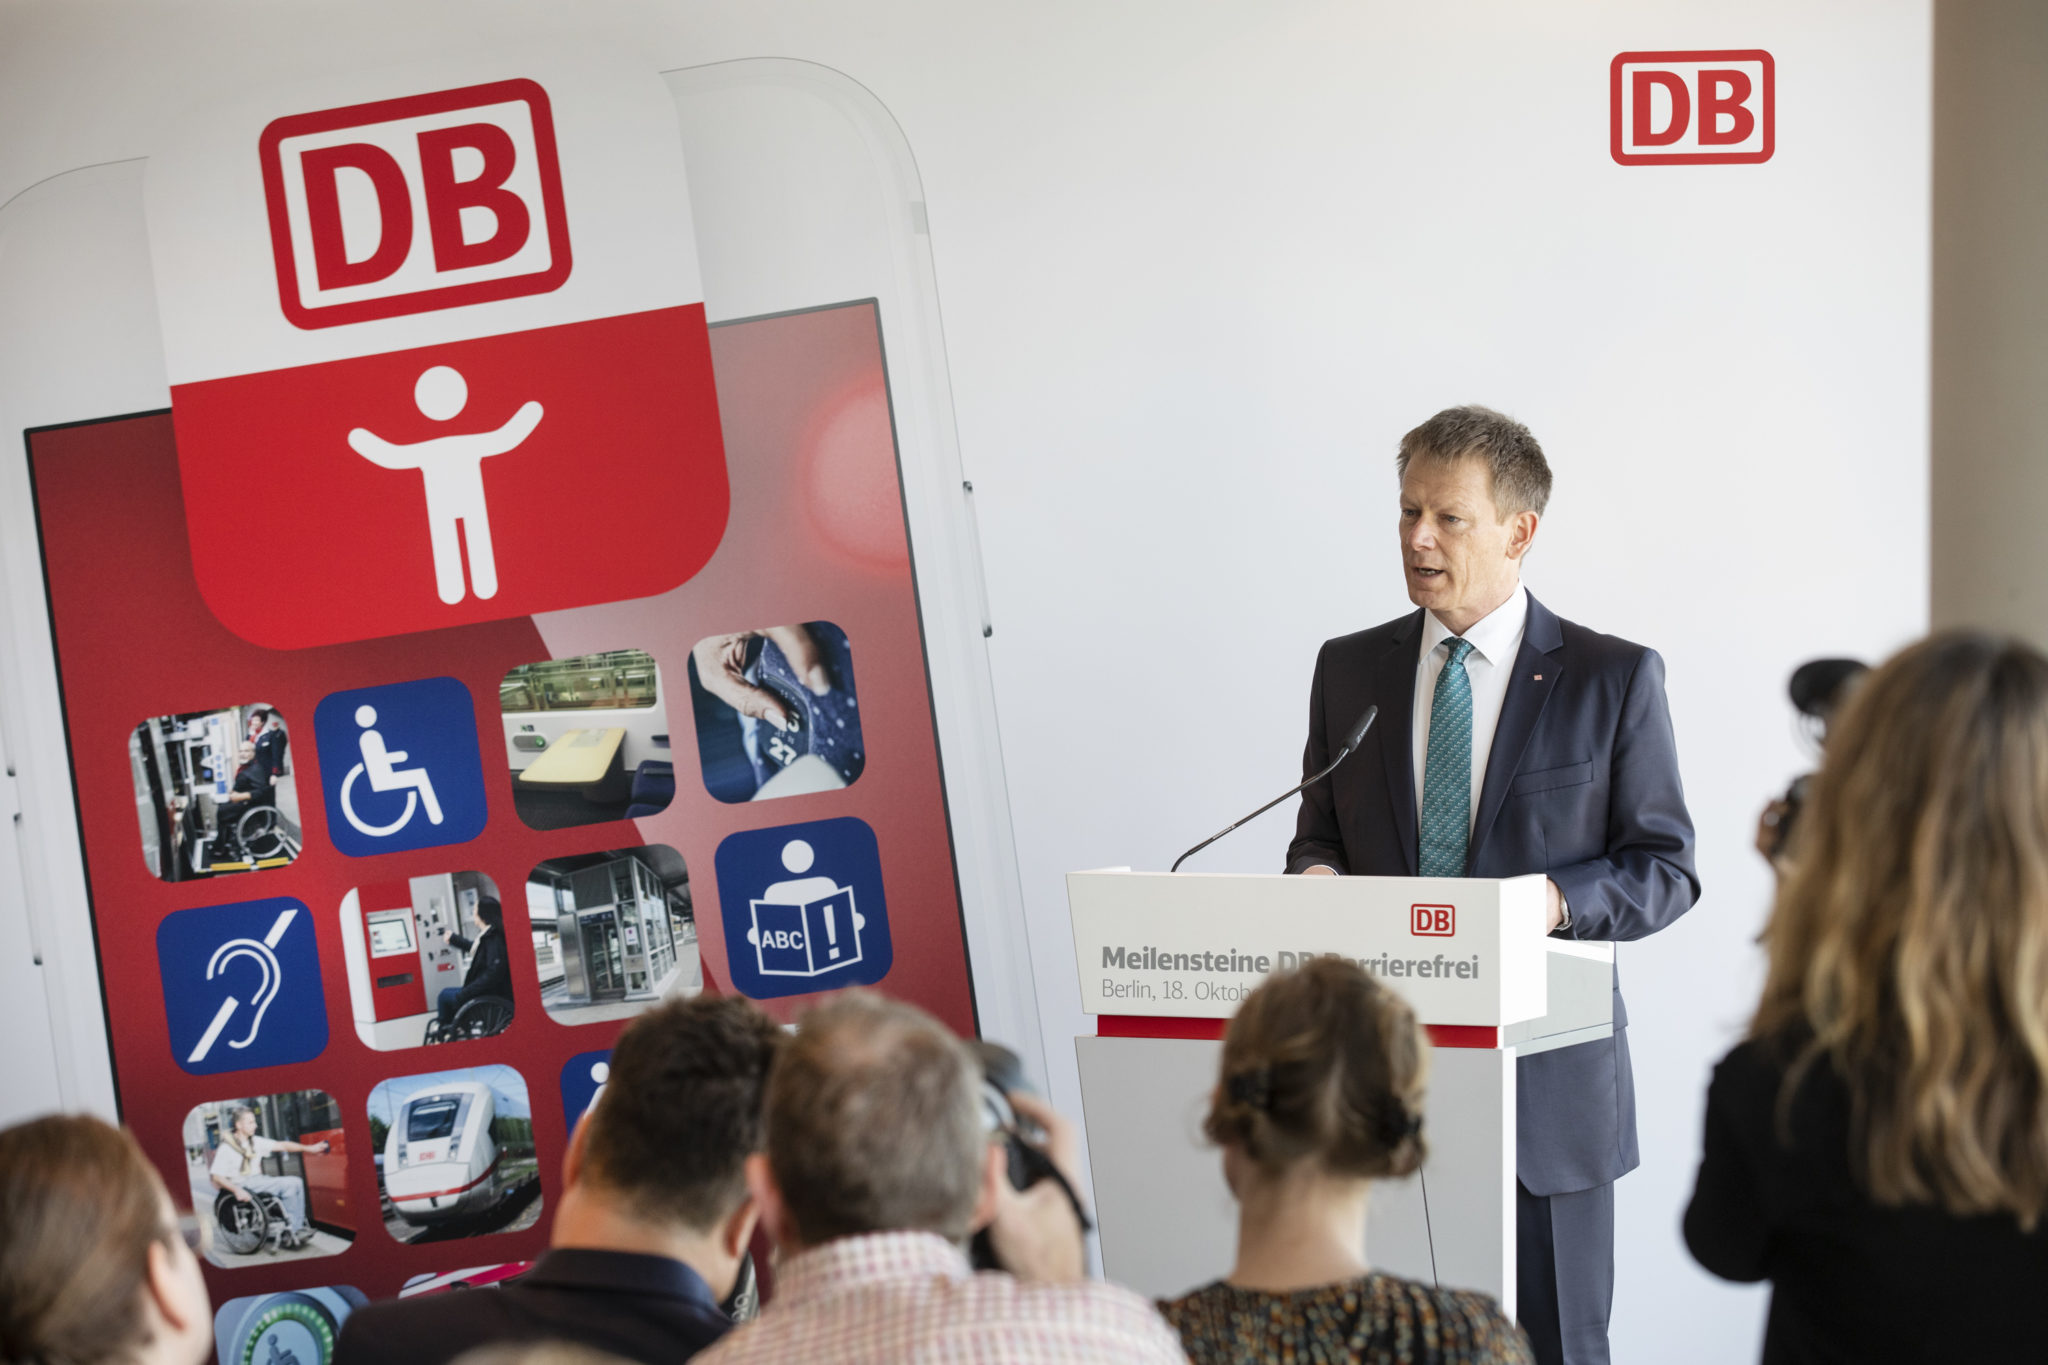 launch of DB Barrierefrei app